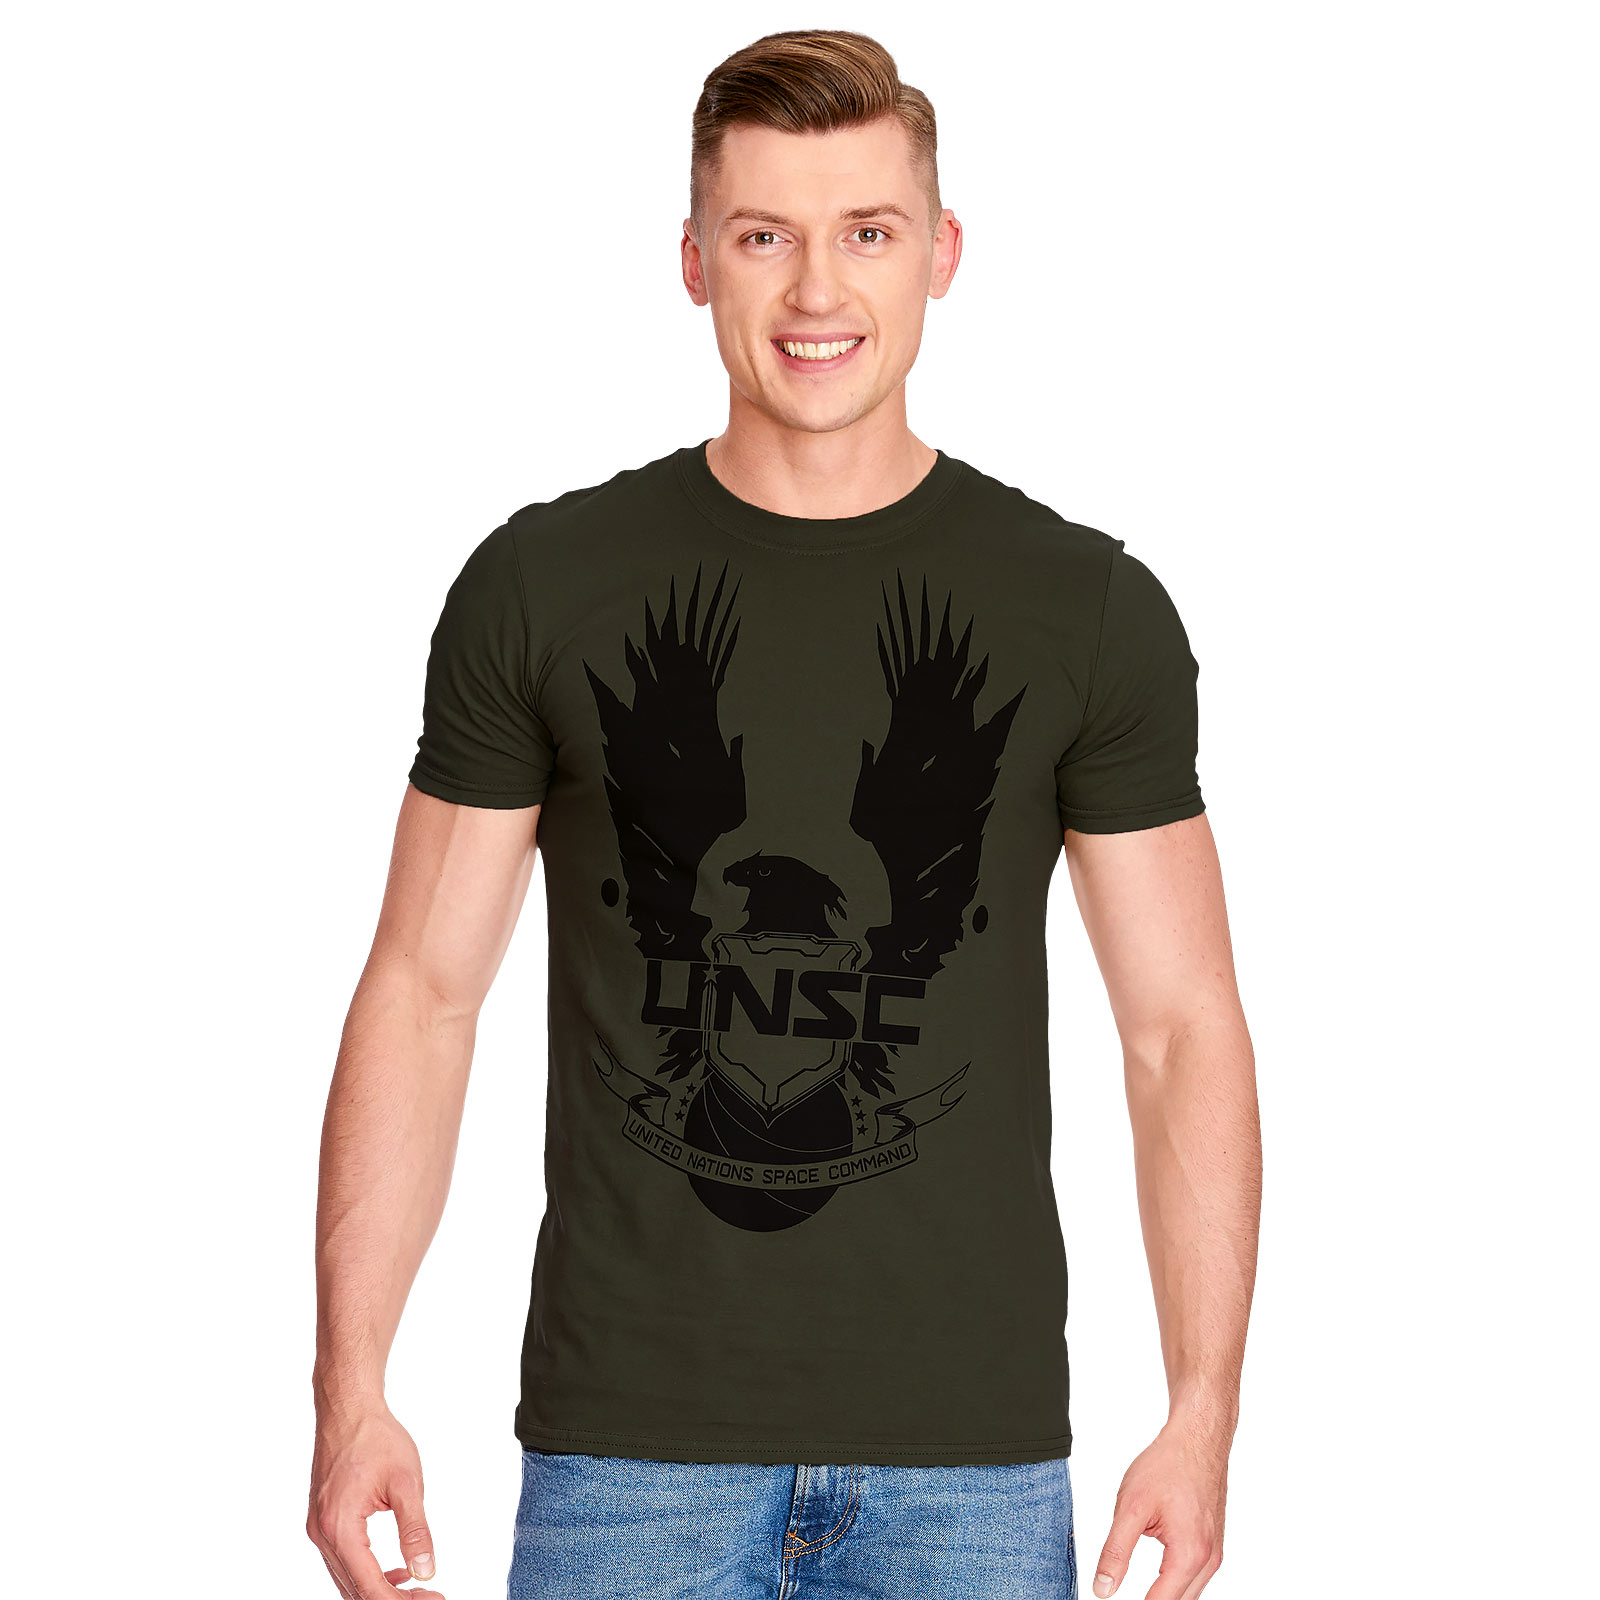 Halo - T-Shirt UNSC olive